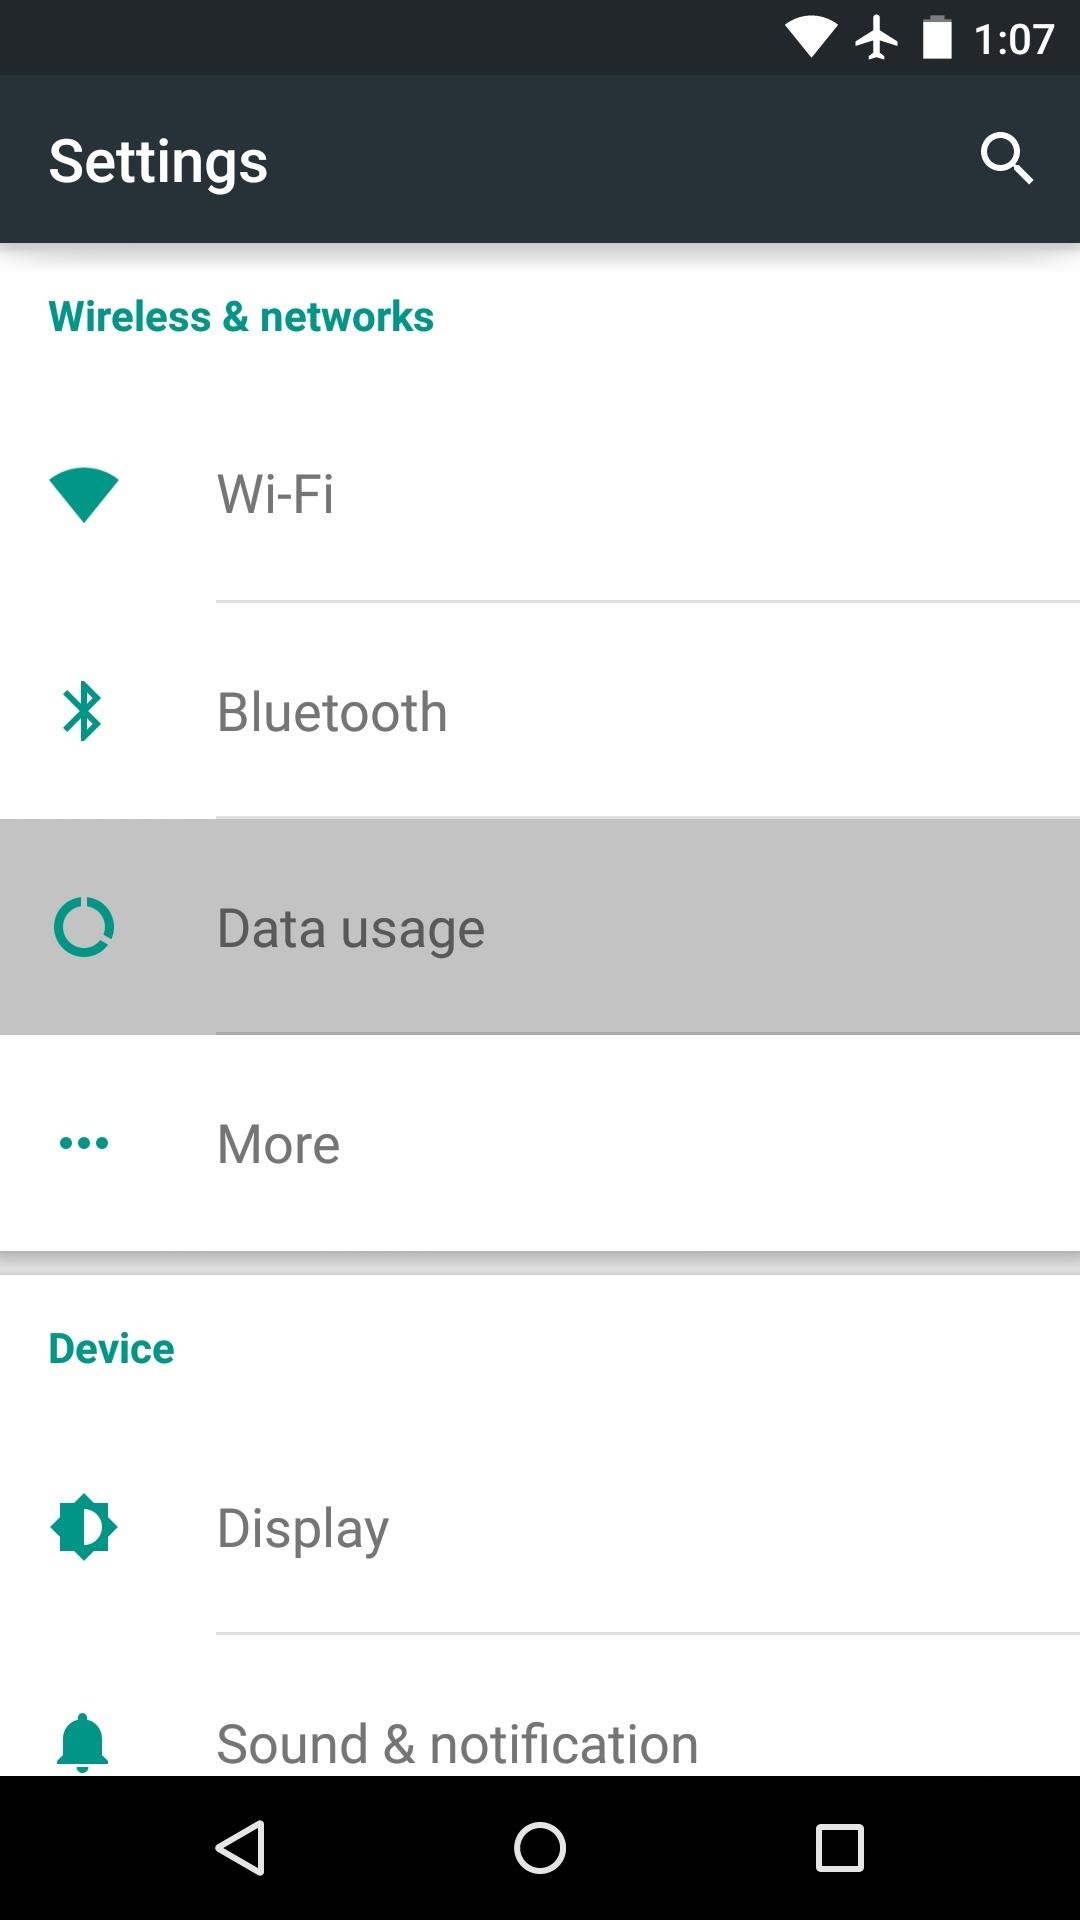 10 Ways to Trick Your Android Phone into Using Less Data